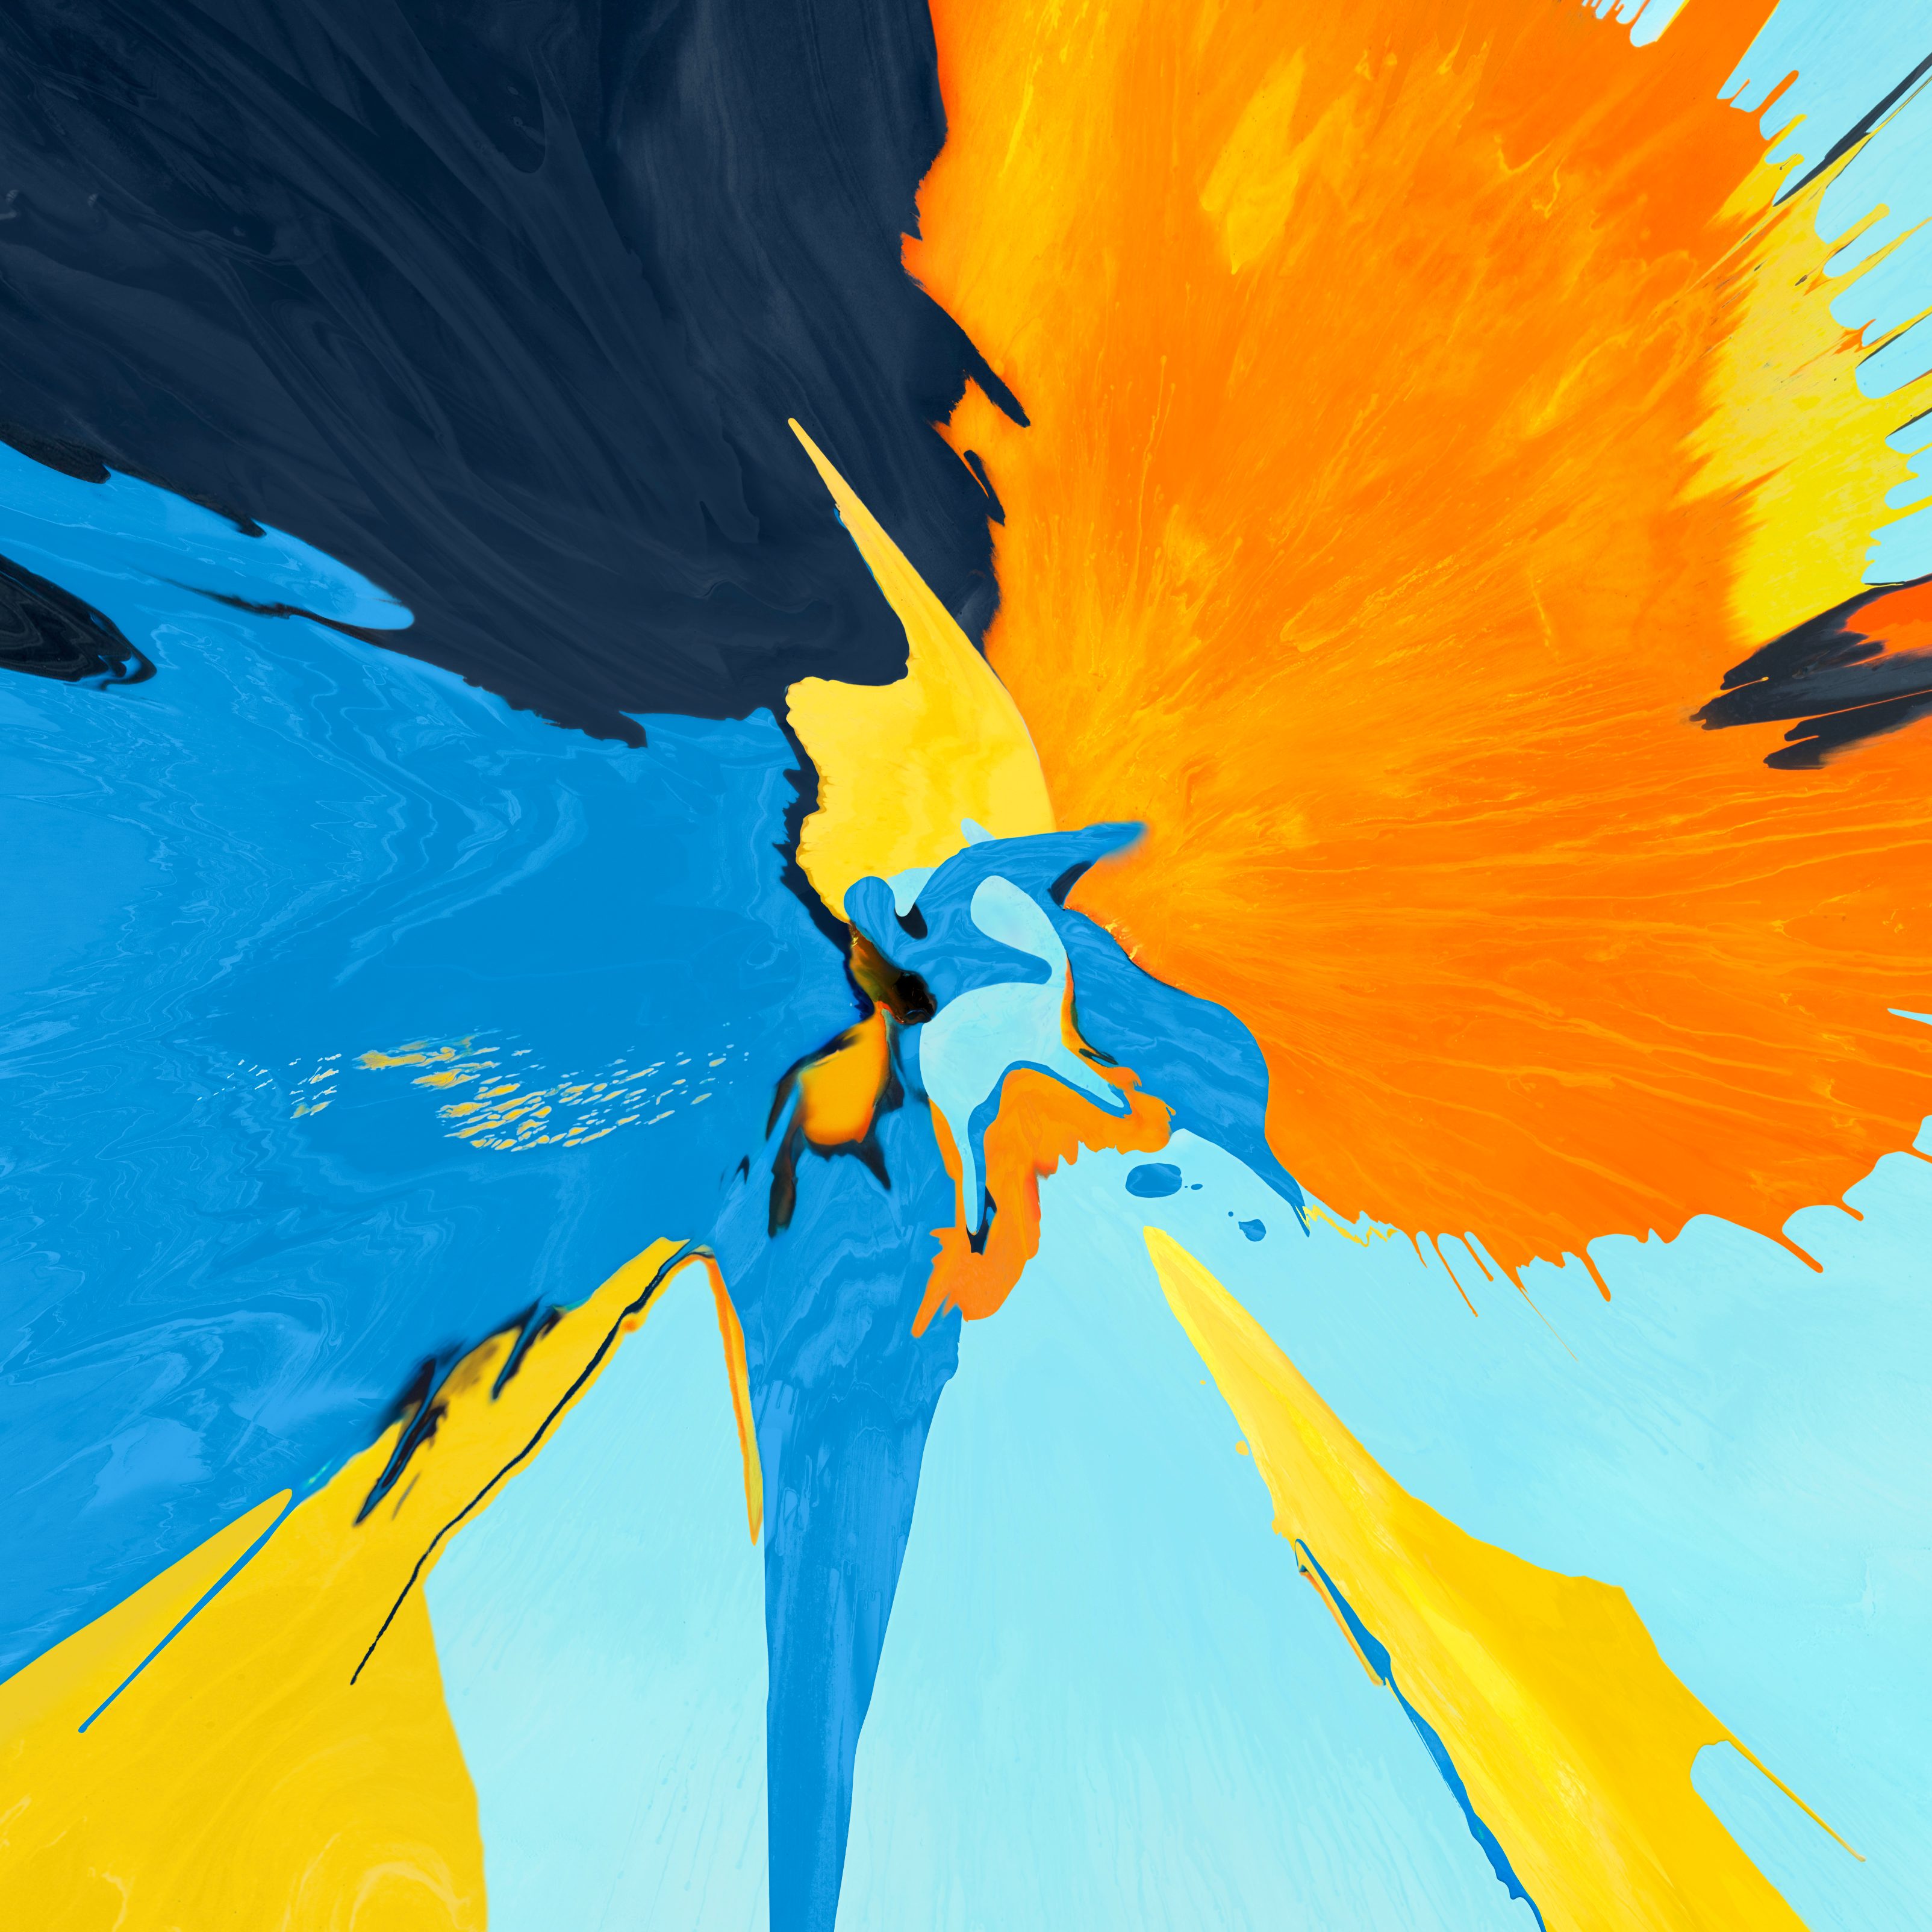 wallpaper download,yellow,blue,painting,orange,acrylic paint